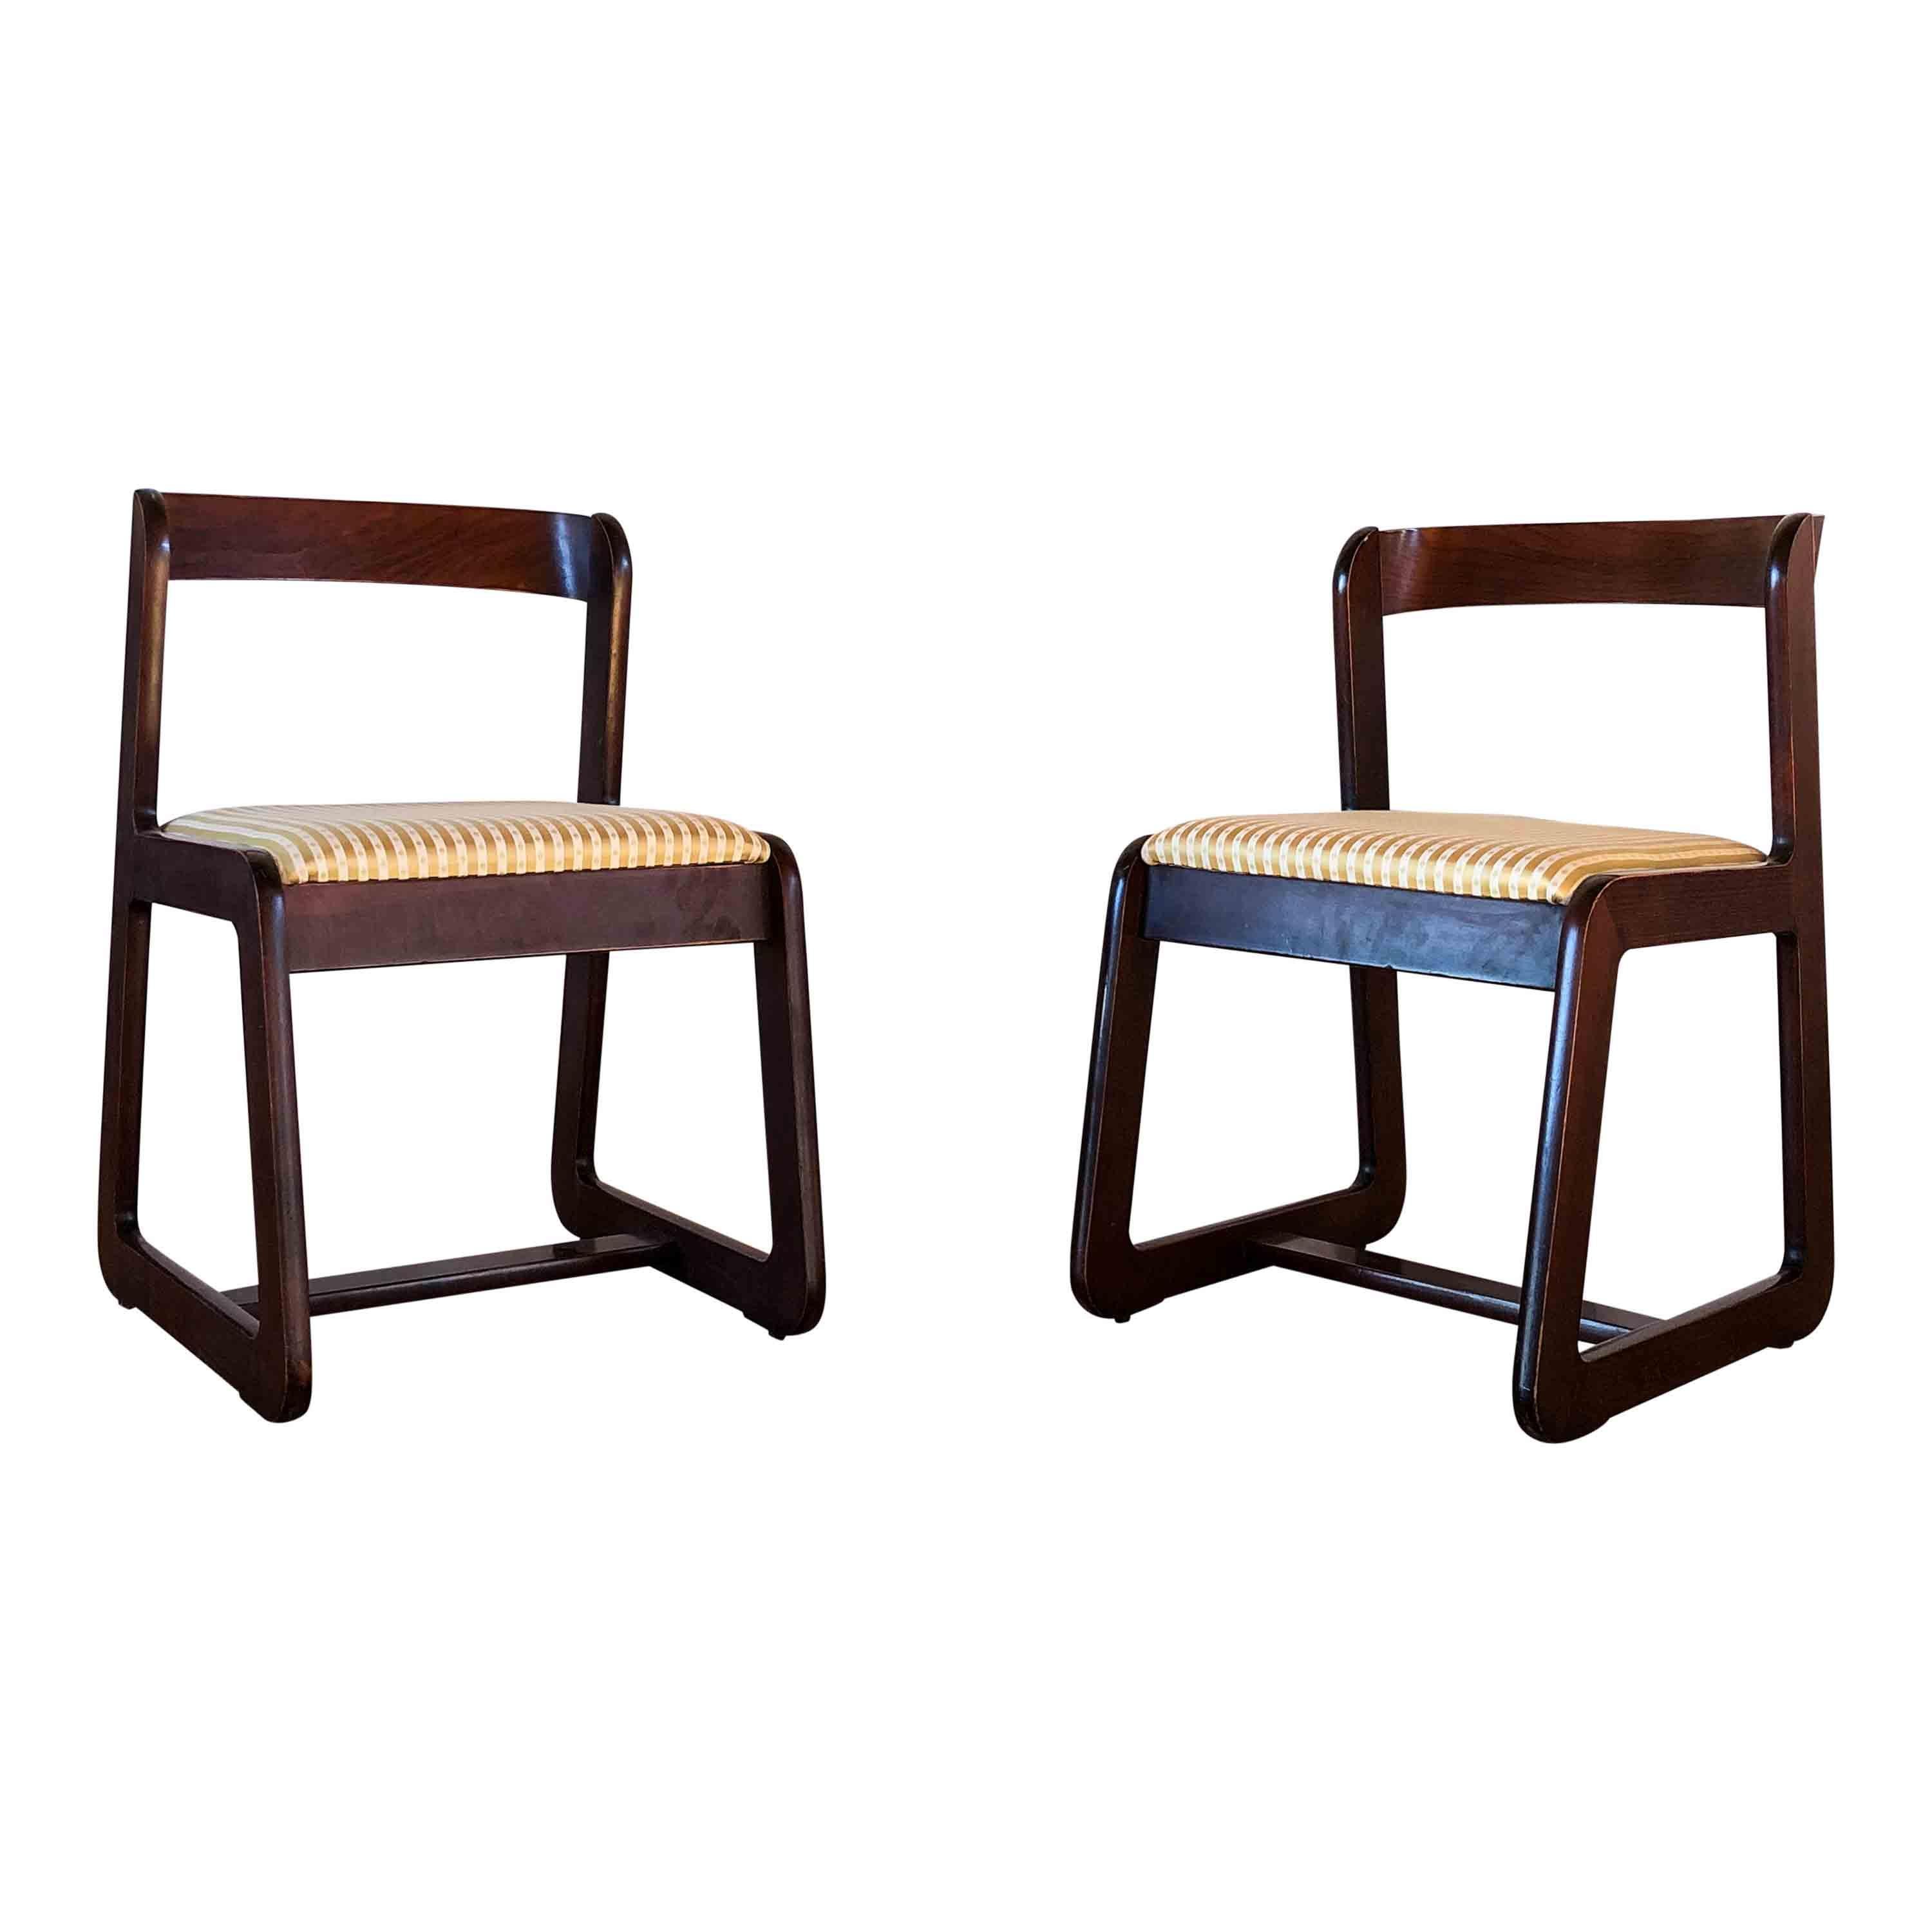 Late 20th Century Midcentury Beech Dining Chairs by Willy Rizzo for Mario Sabot, 70s, Set of 6 For Sale